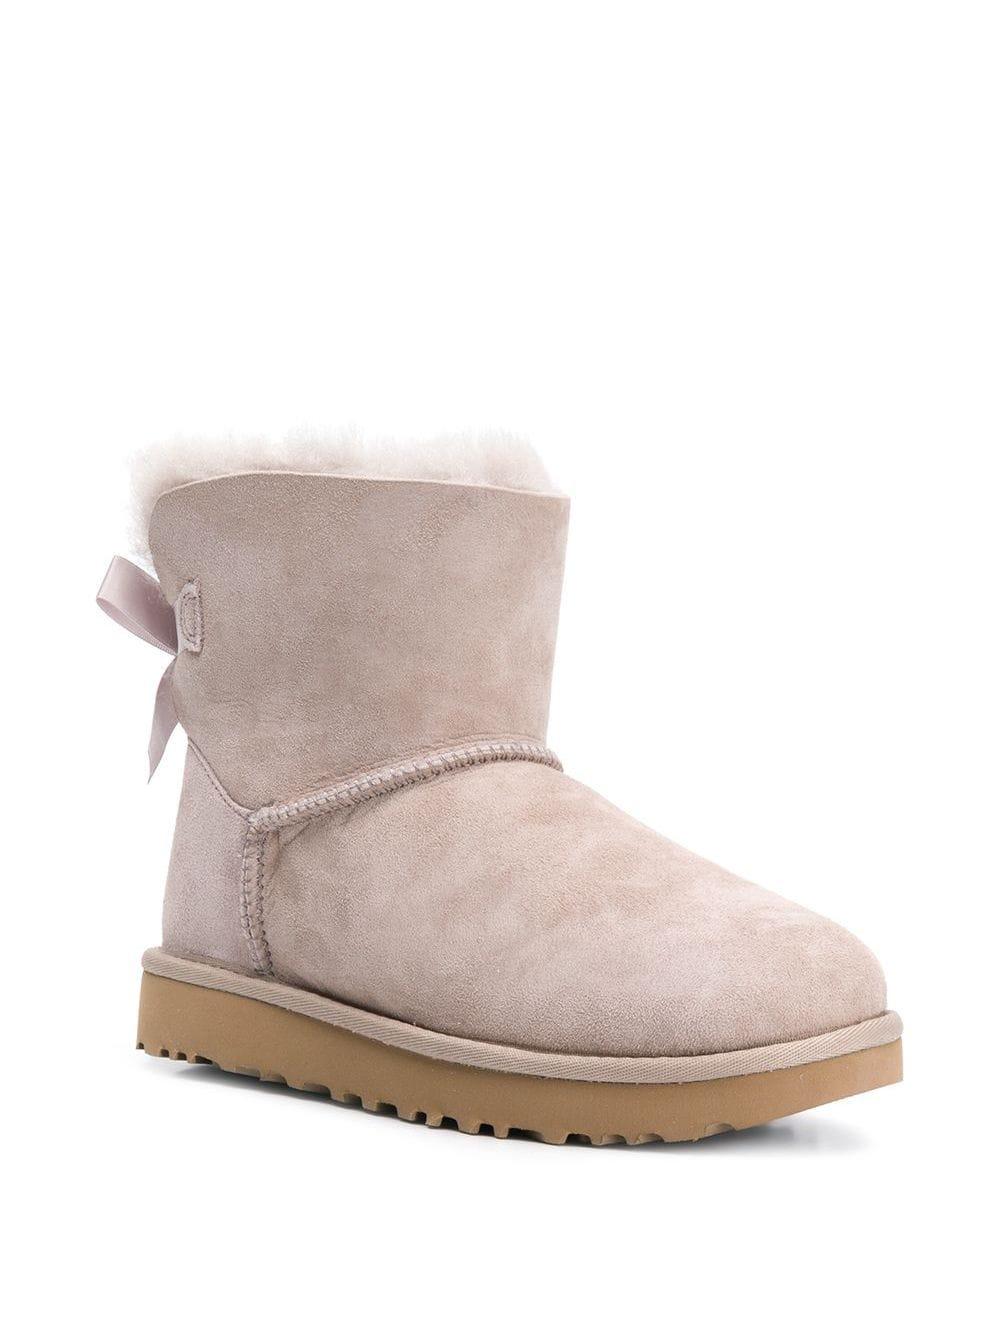 UGG Fur Lined Boots in Grey (Gray) - Lyst